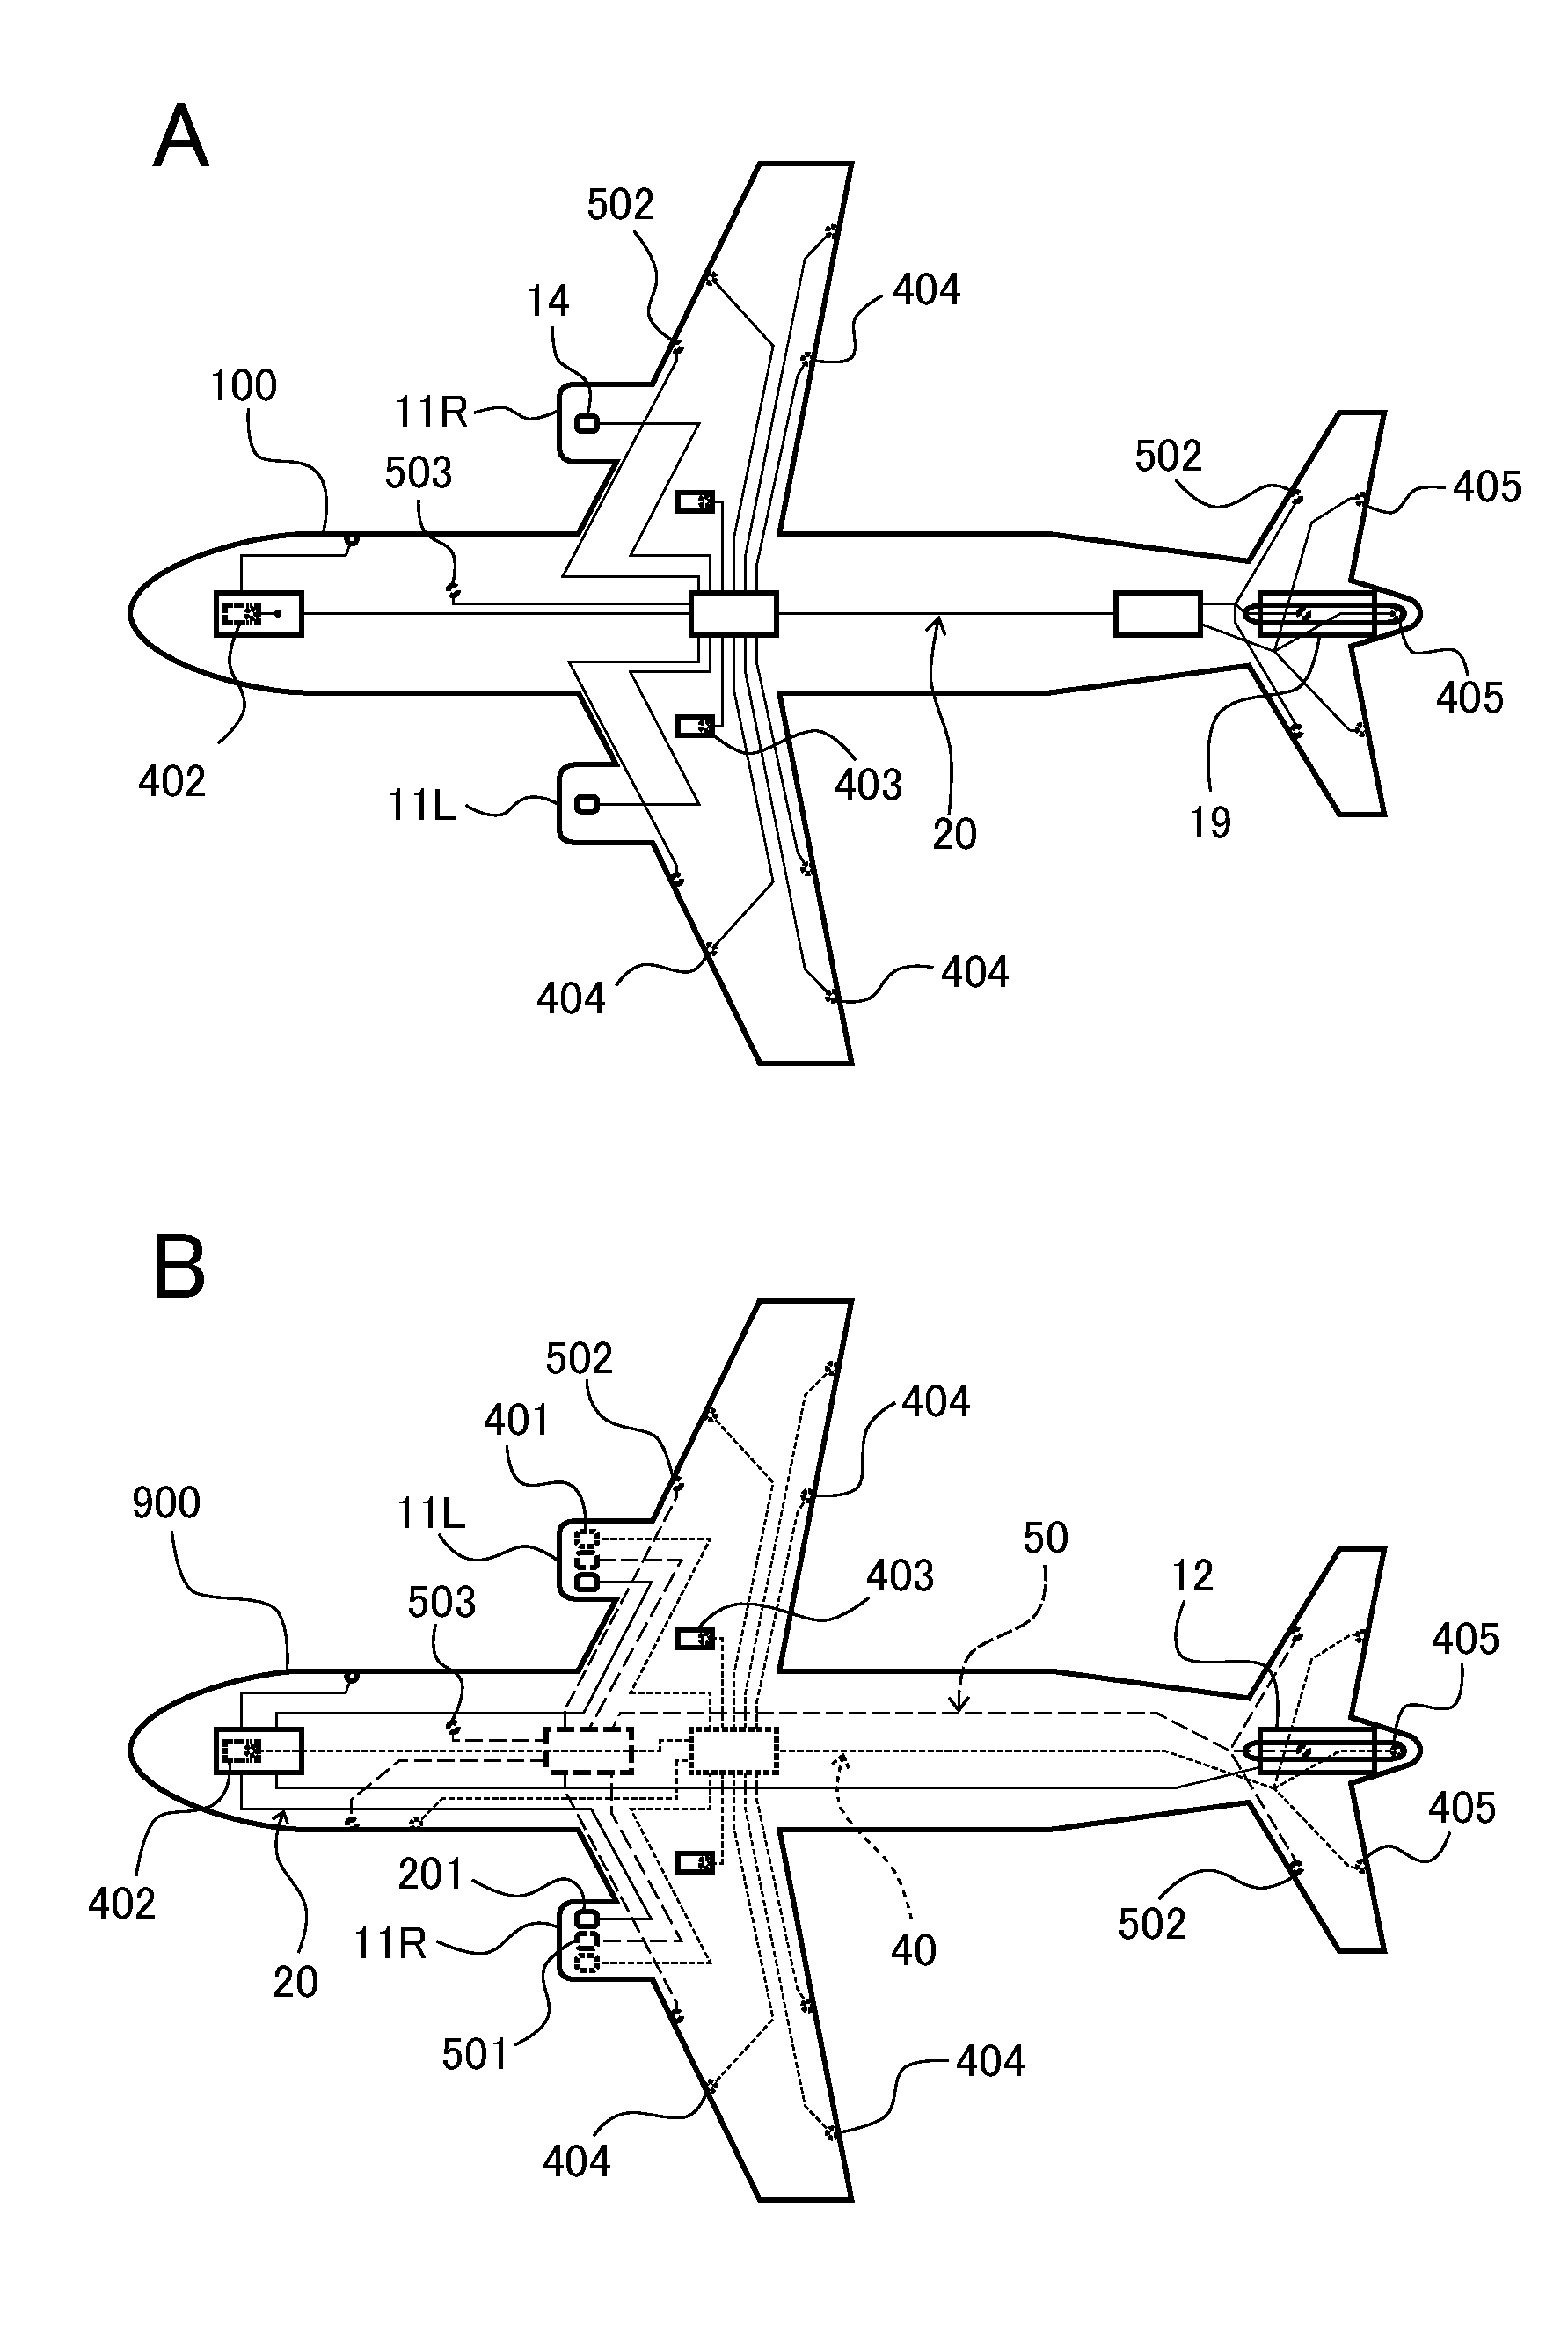 Electric system stabilizing system for aircraft